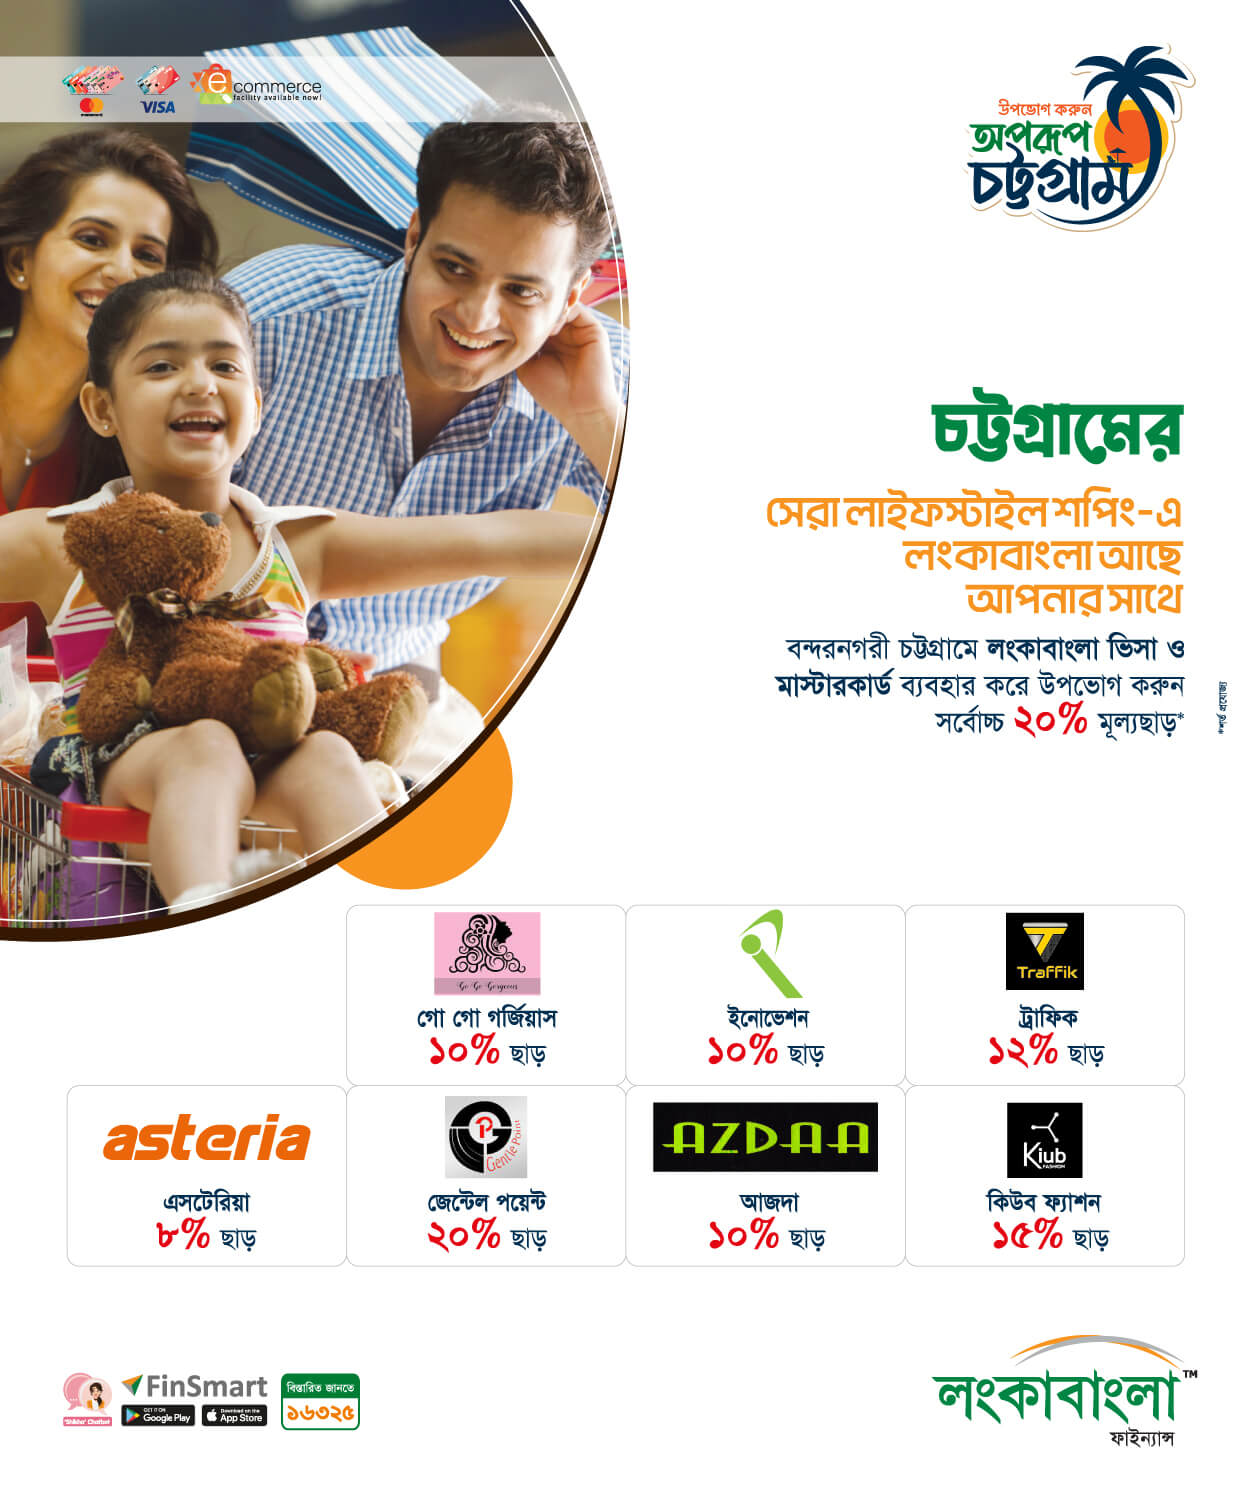 Lifestyle Offer in Chattogram